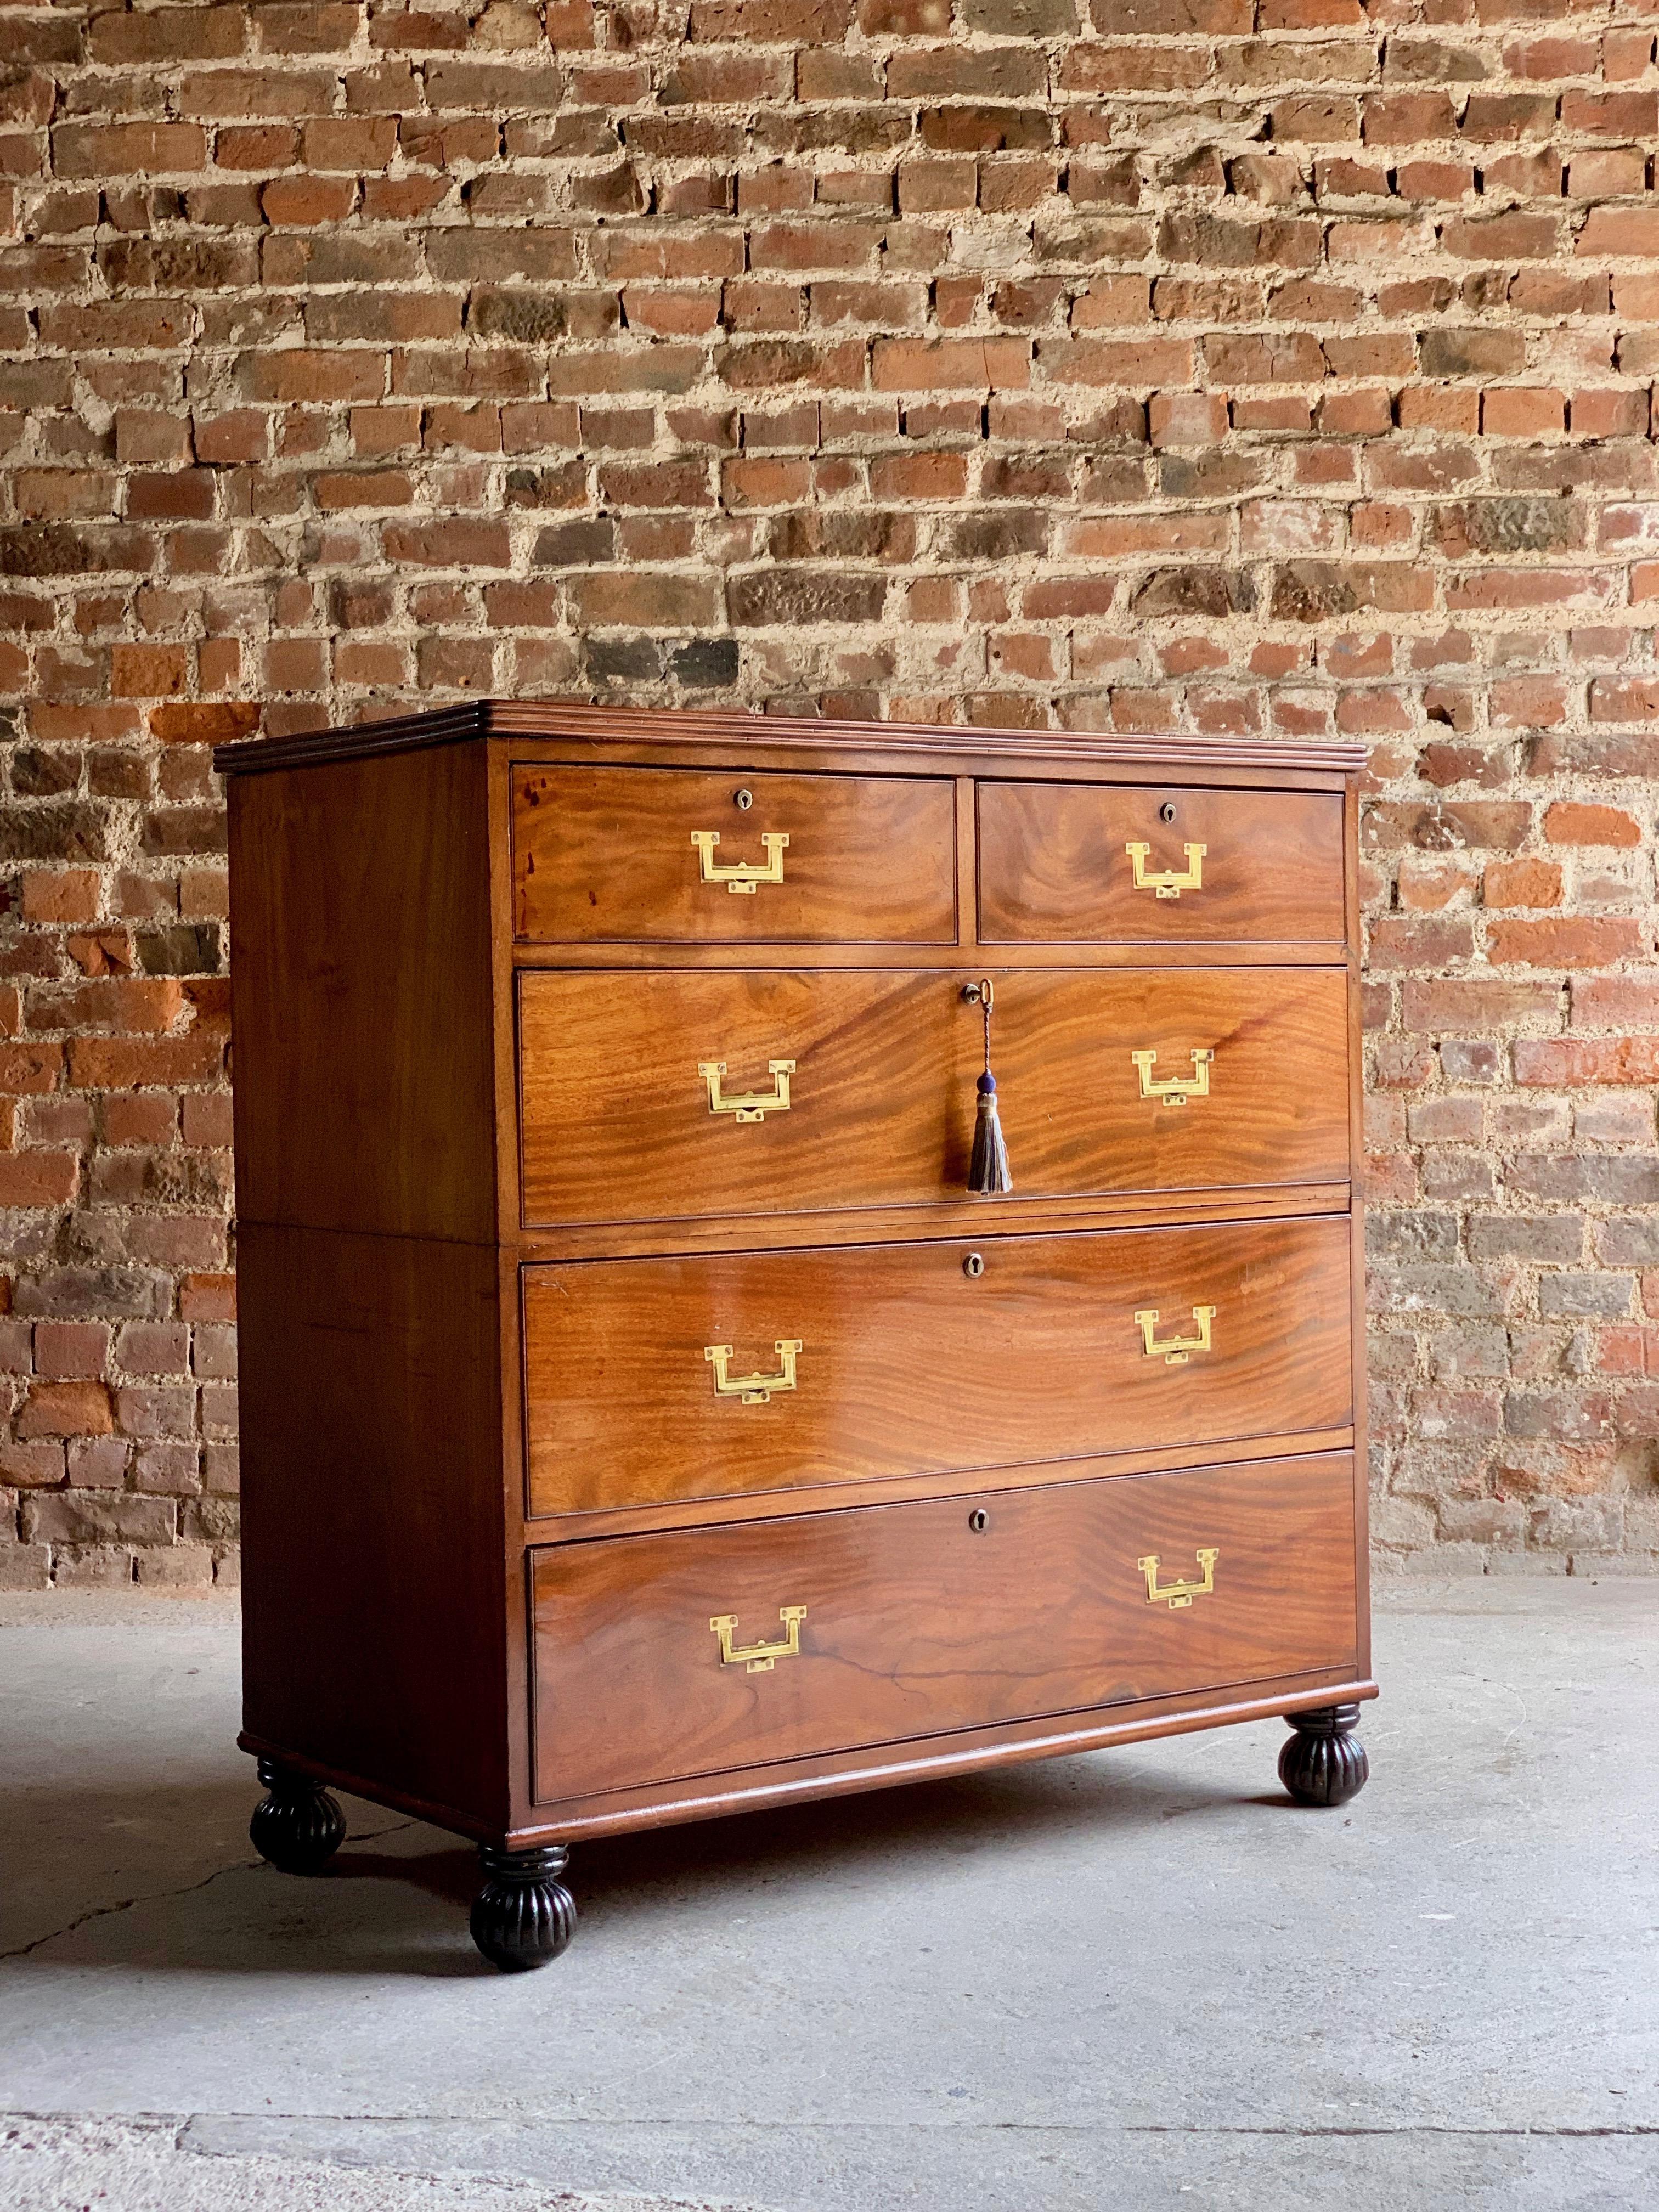 19th century mahogany Military Campaign chest of drawers circa 1850 no: 22.

A magnificent mid-19th century mahogany military campaign chest in two sections circa 1850, fitted with an arrangement of three long and two short drawers, with flush